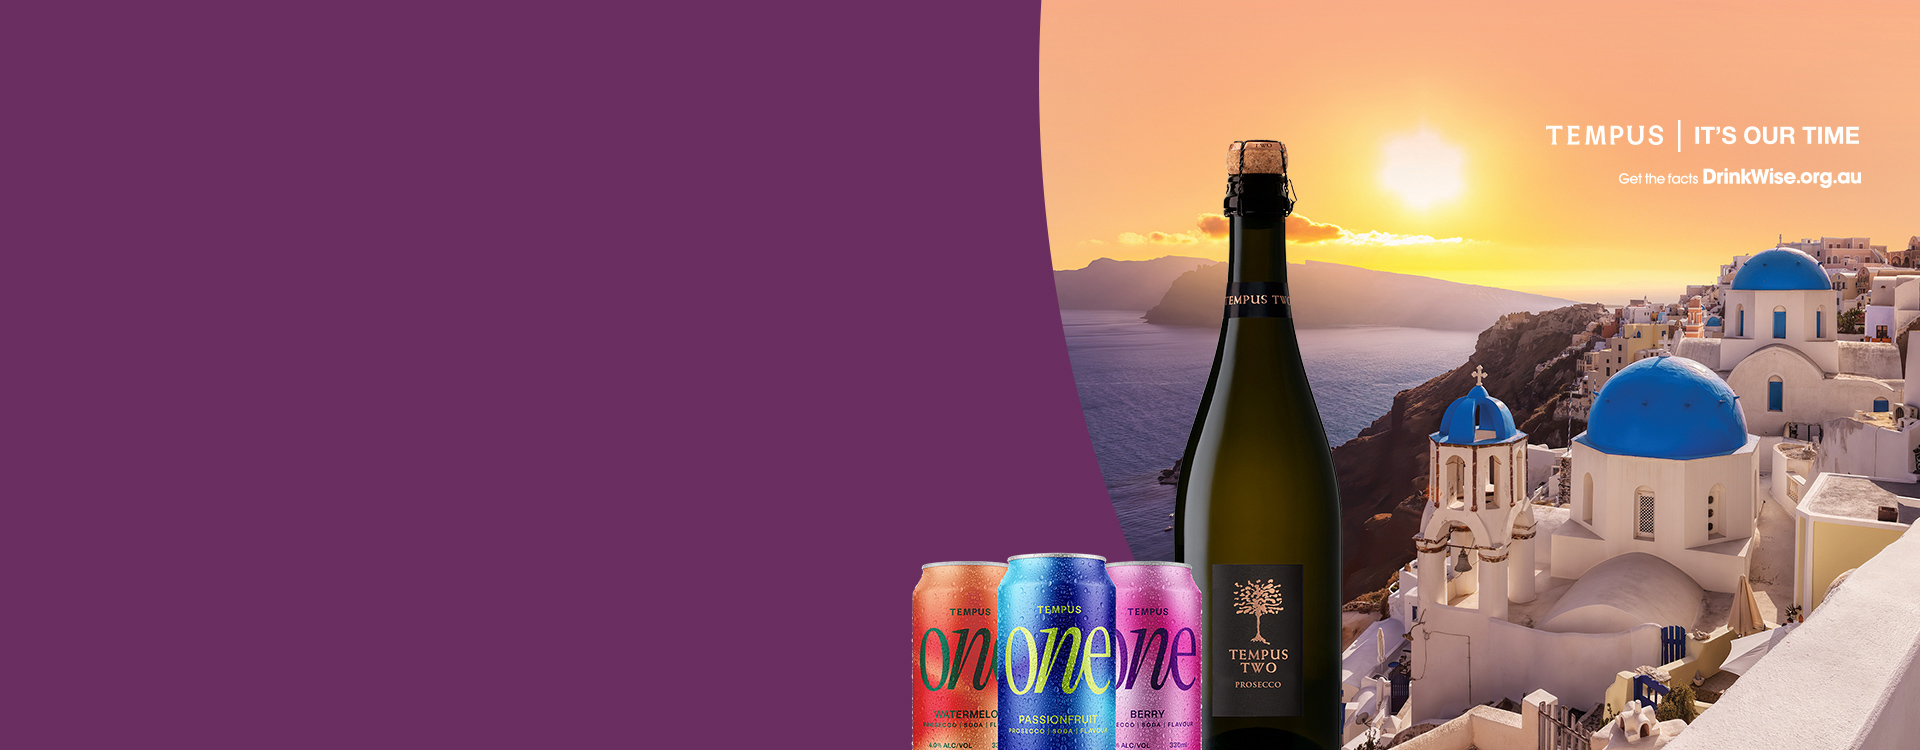 Endless Summer greece promotional homepage banner with Tempus One cans and a bottle of Tempus Two Prosecco